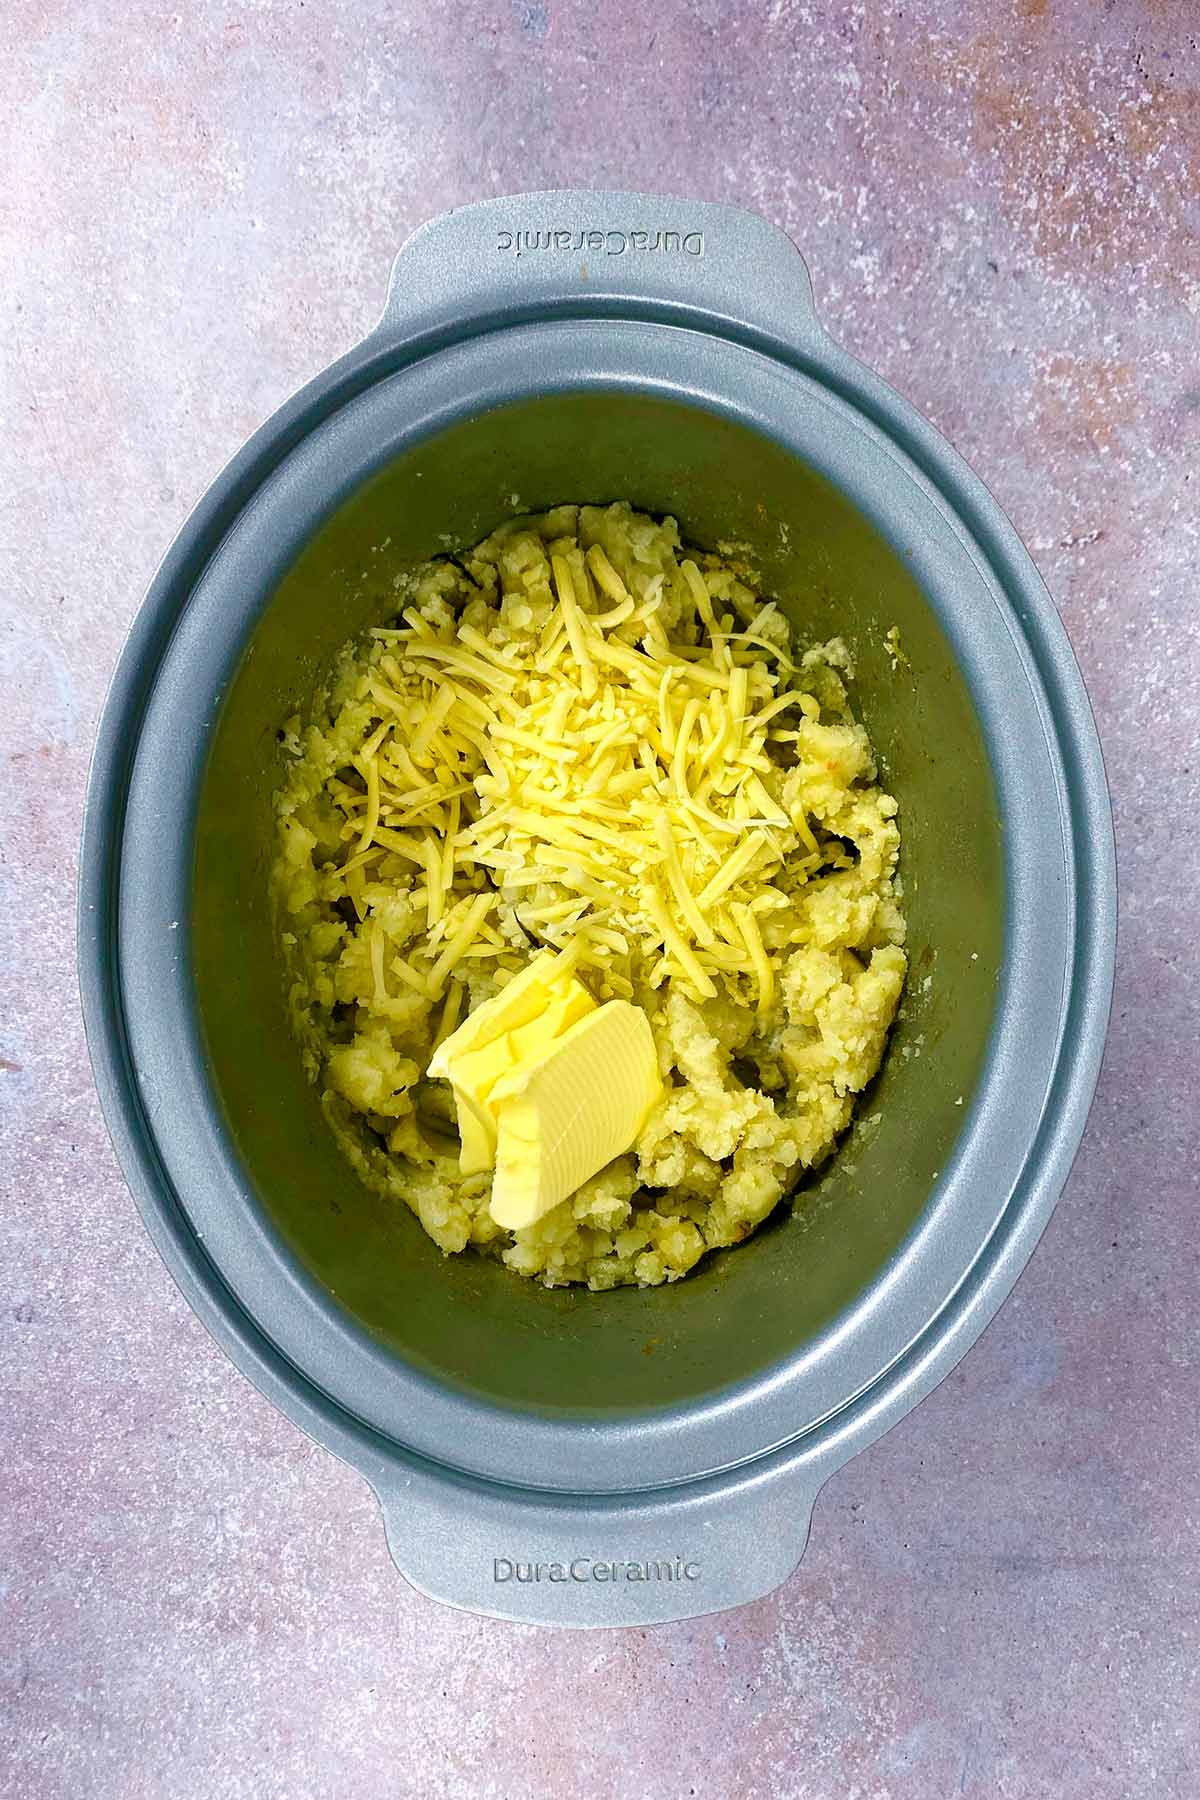 Mashed potatoes, pats of butter and grated cheese in a slow cooker.